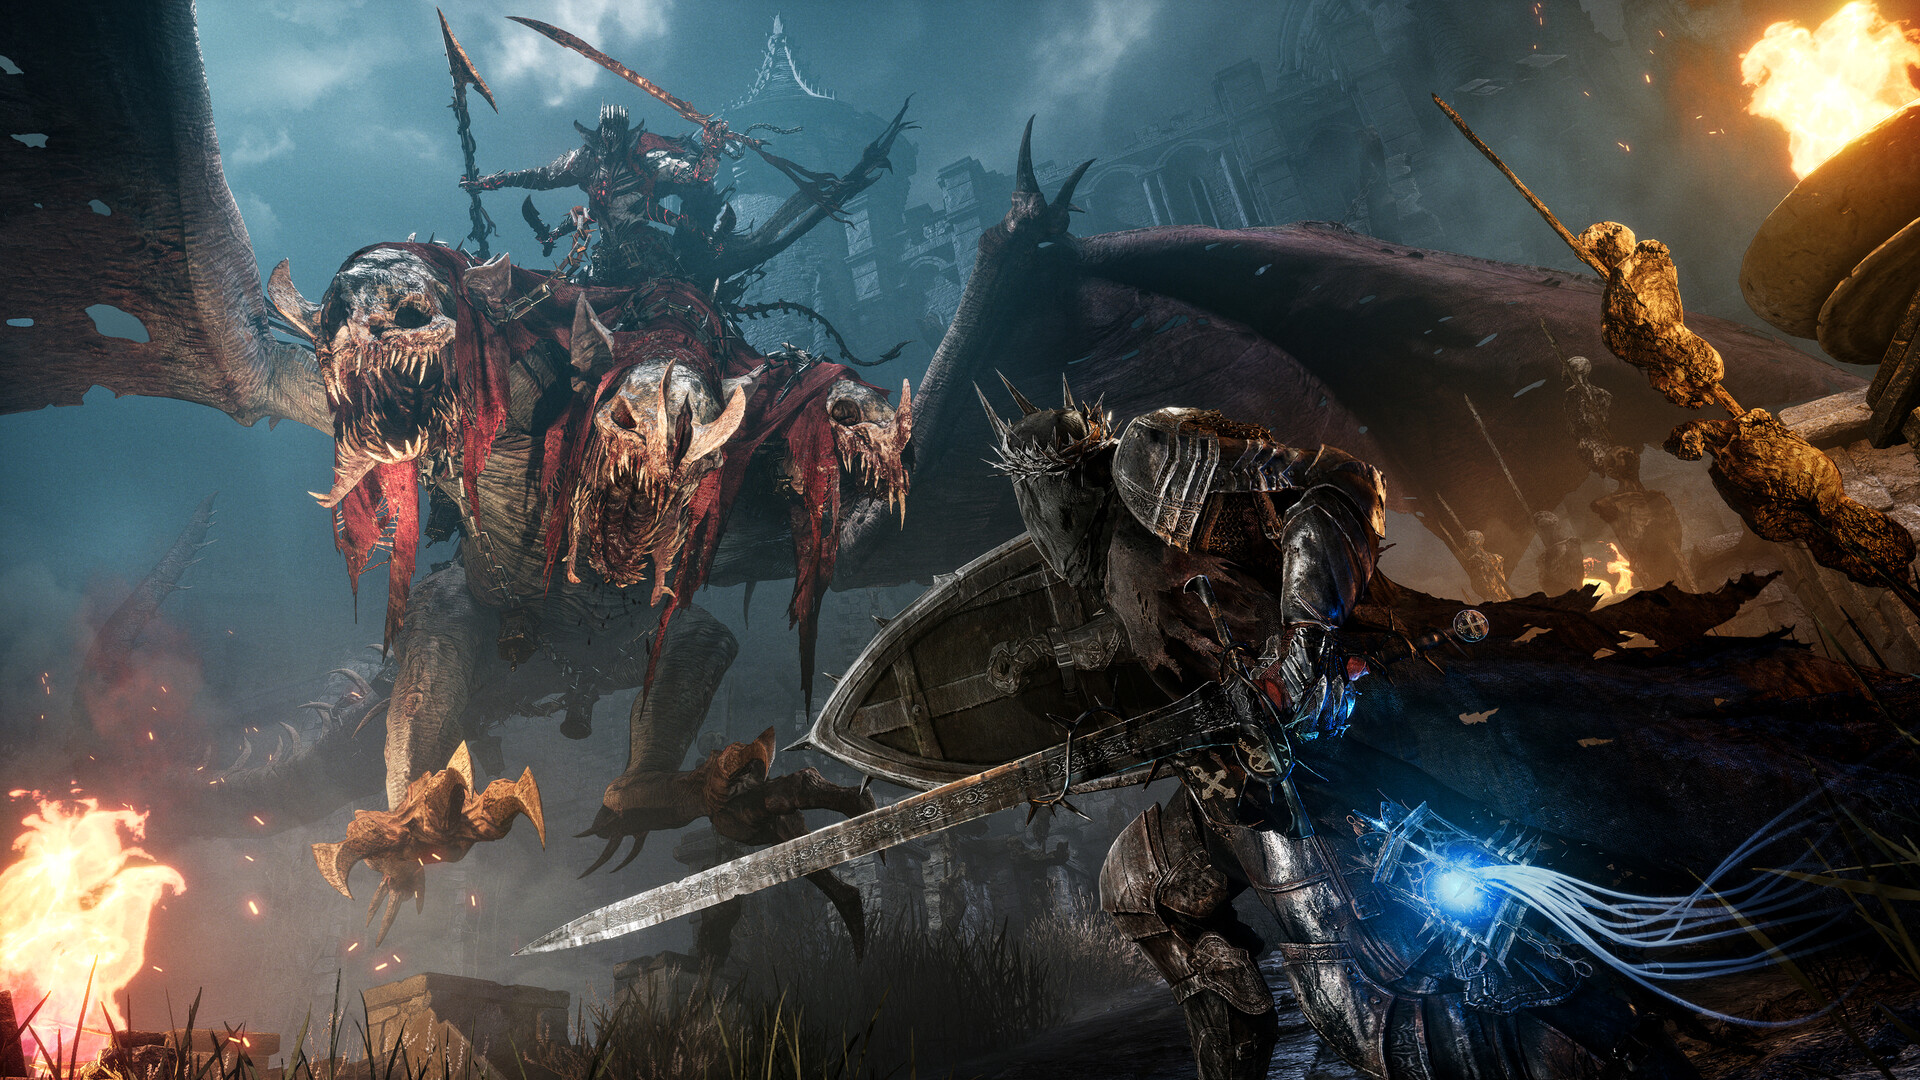 Lords of the Fallen’s latest update brings new optimisations and a “Cinematic” graphics mode